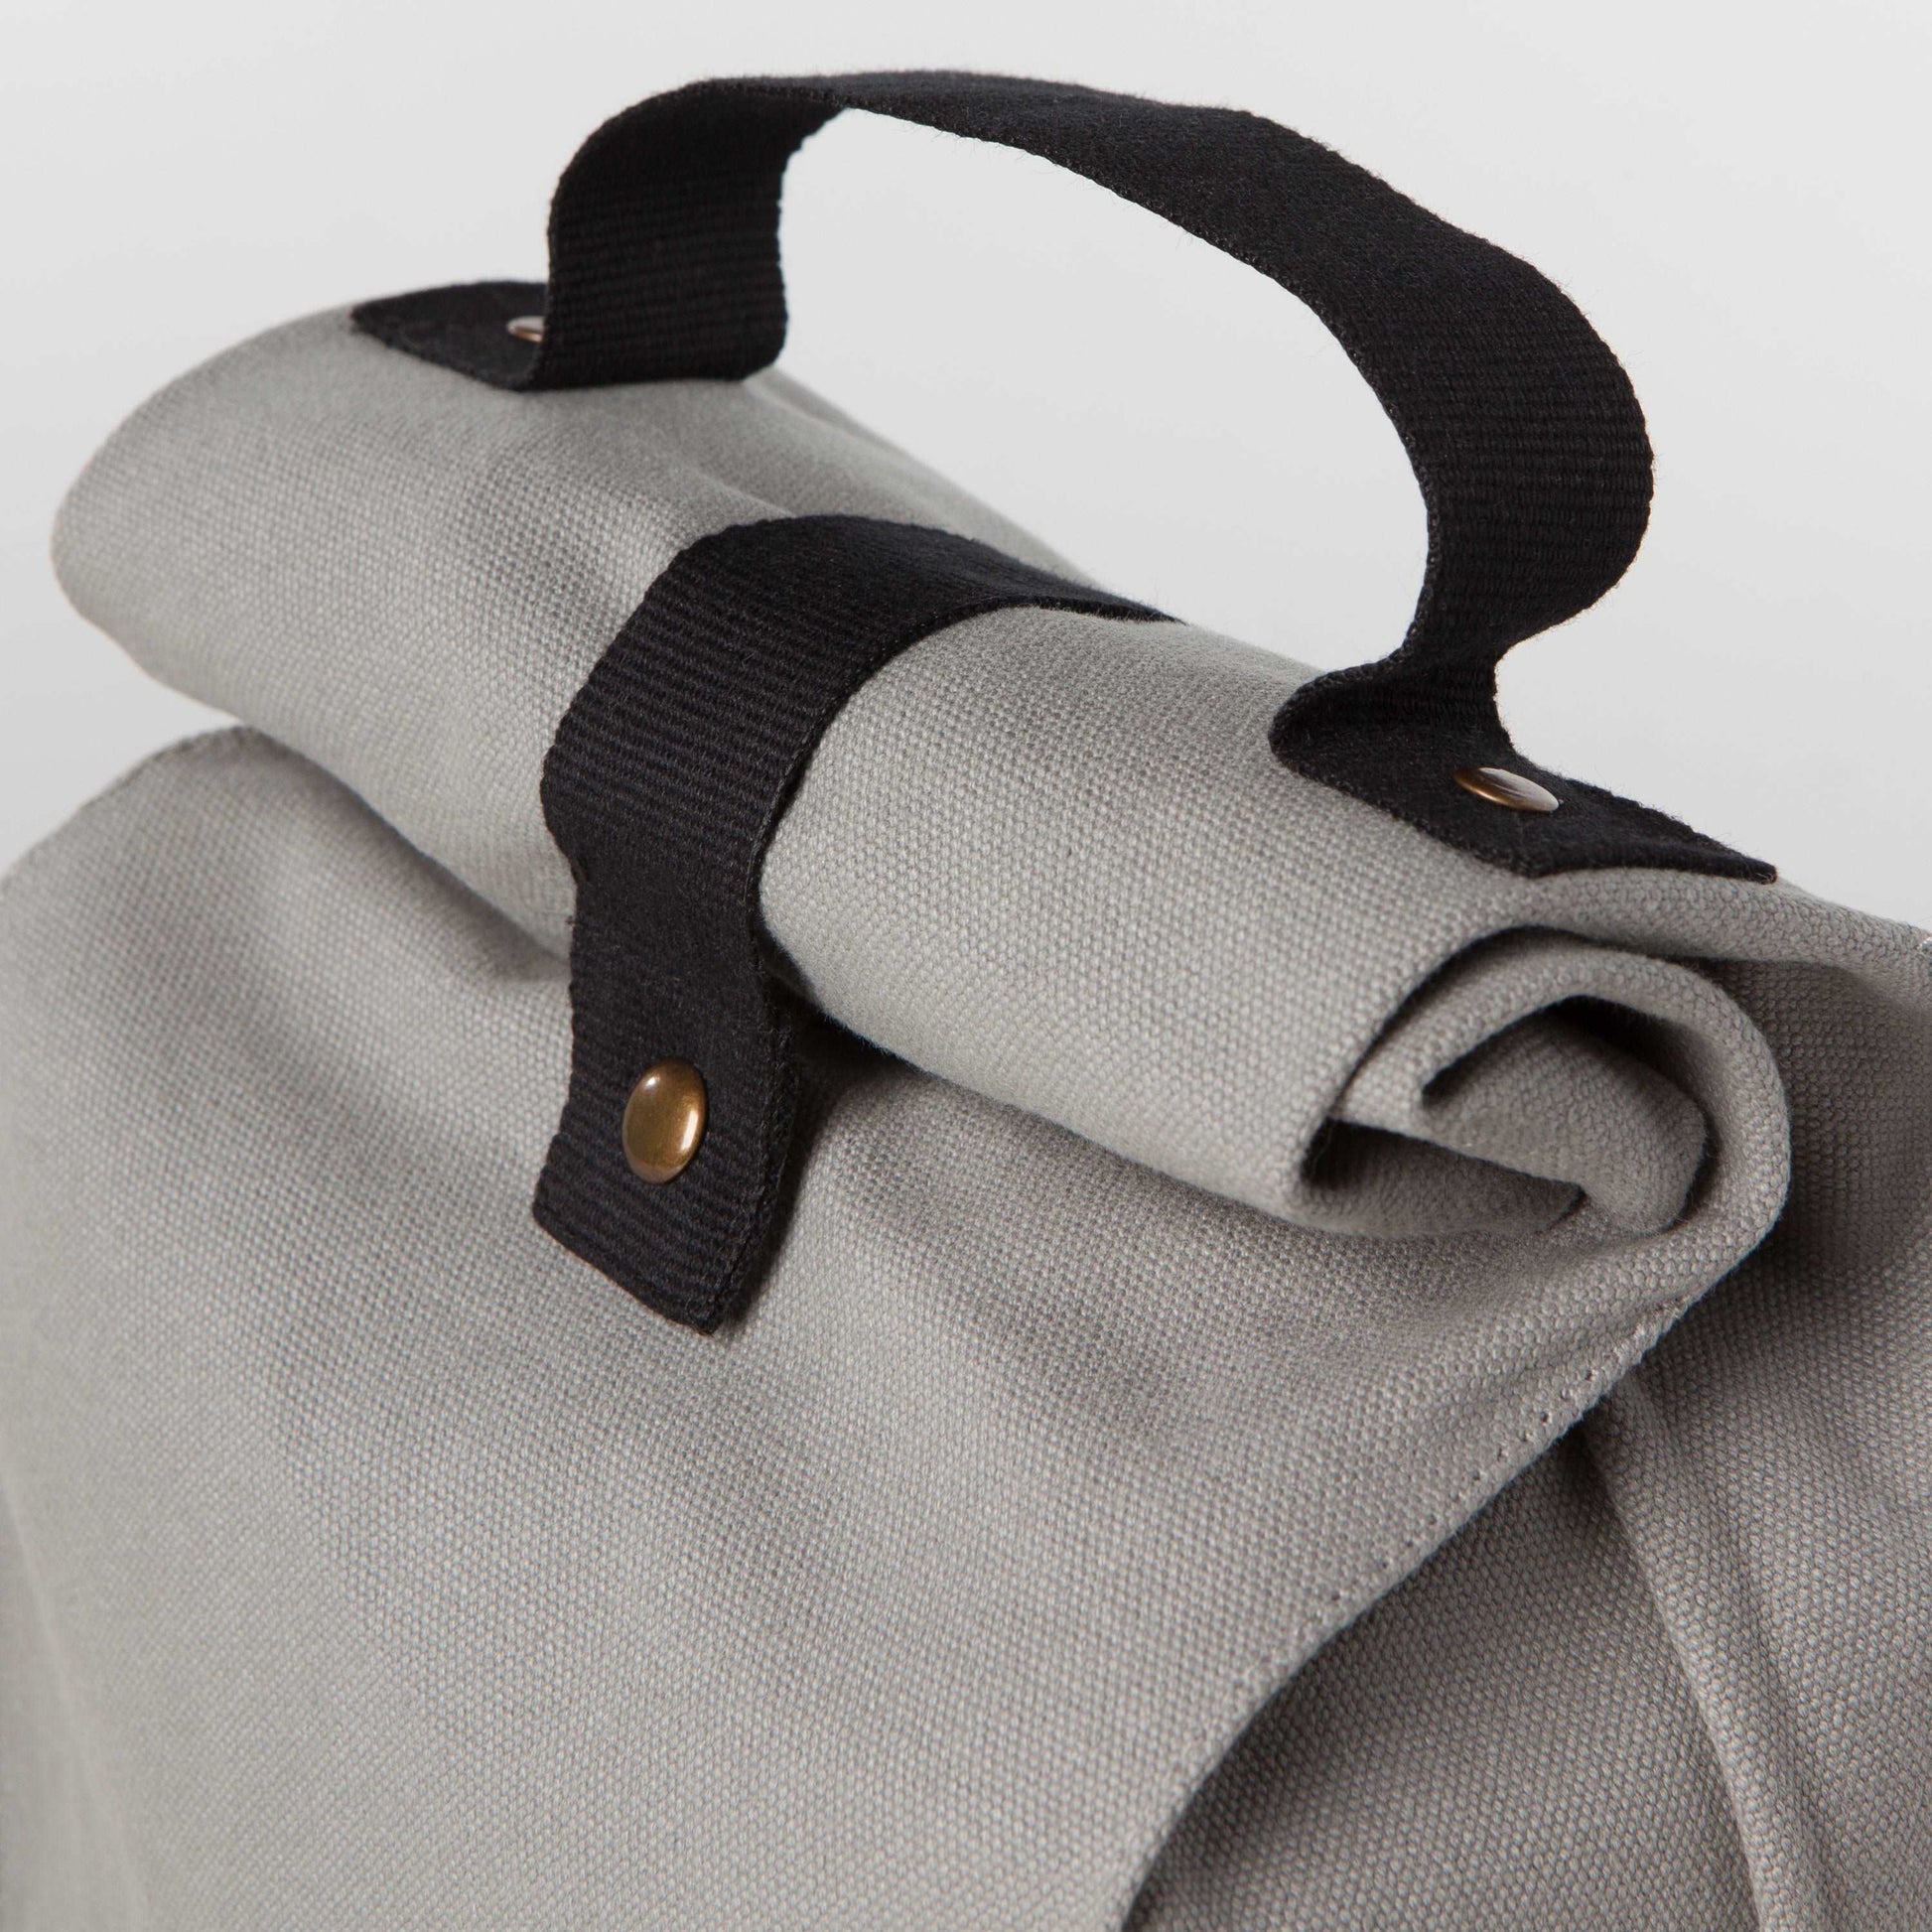 Forage + Gather Lunch Bag - Gray